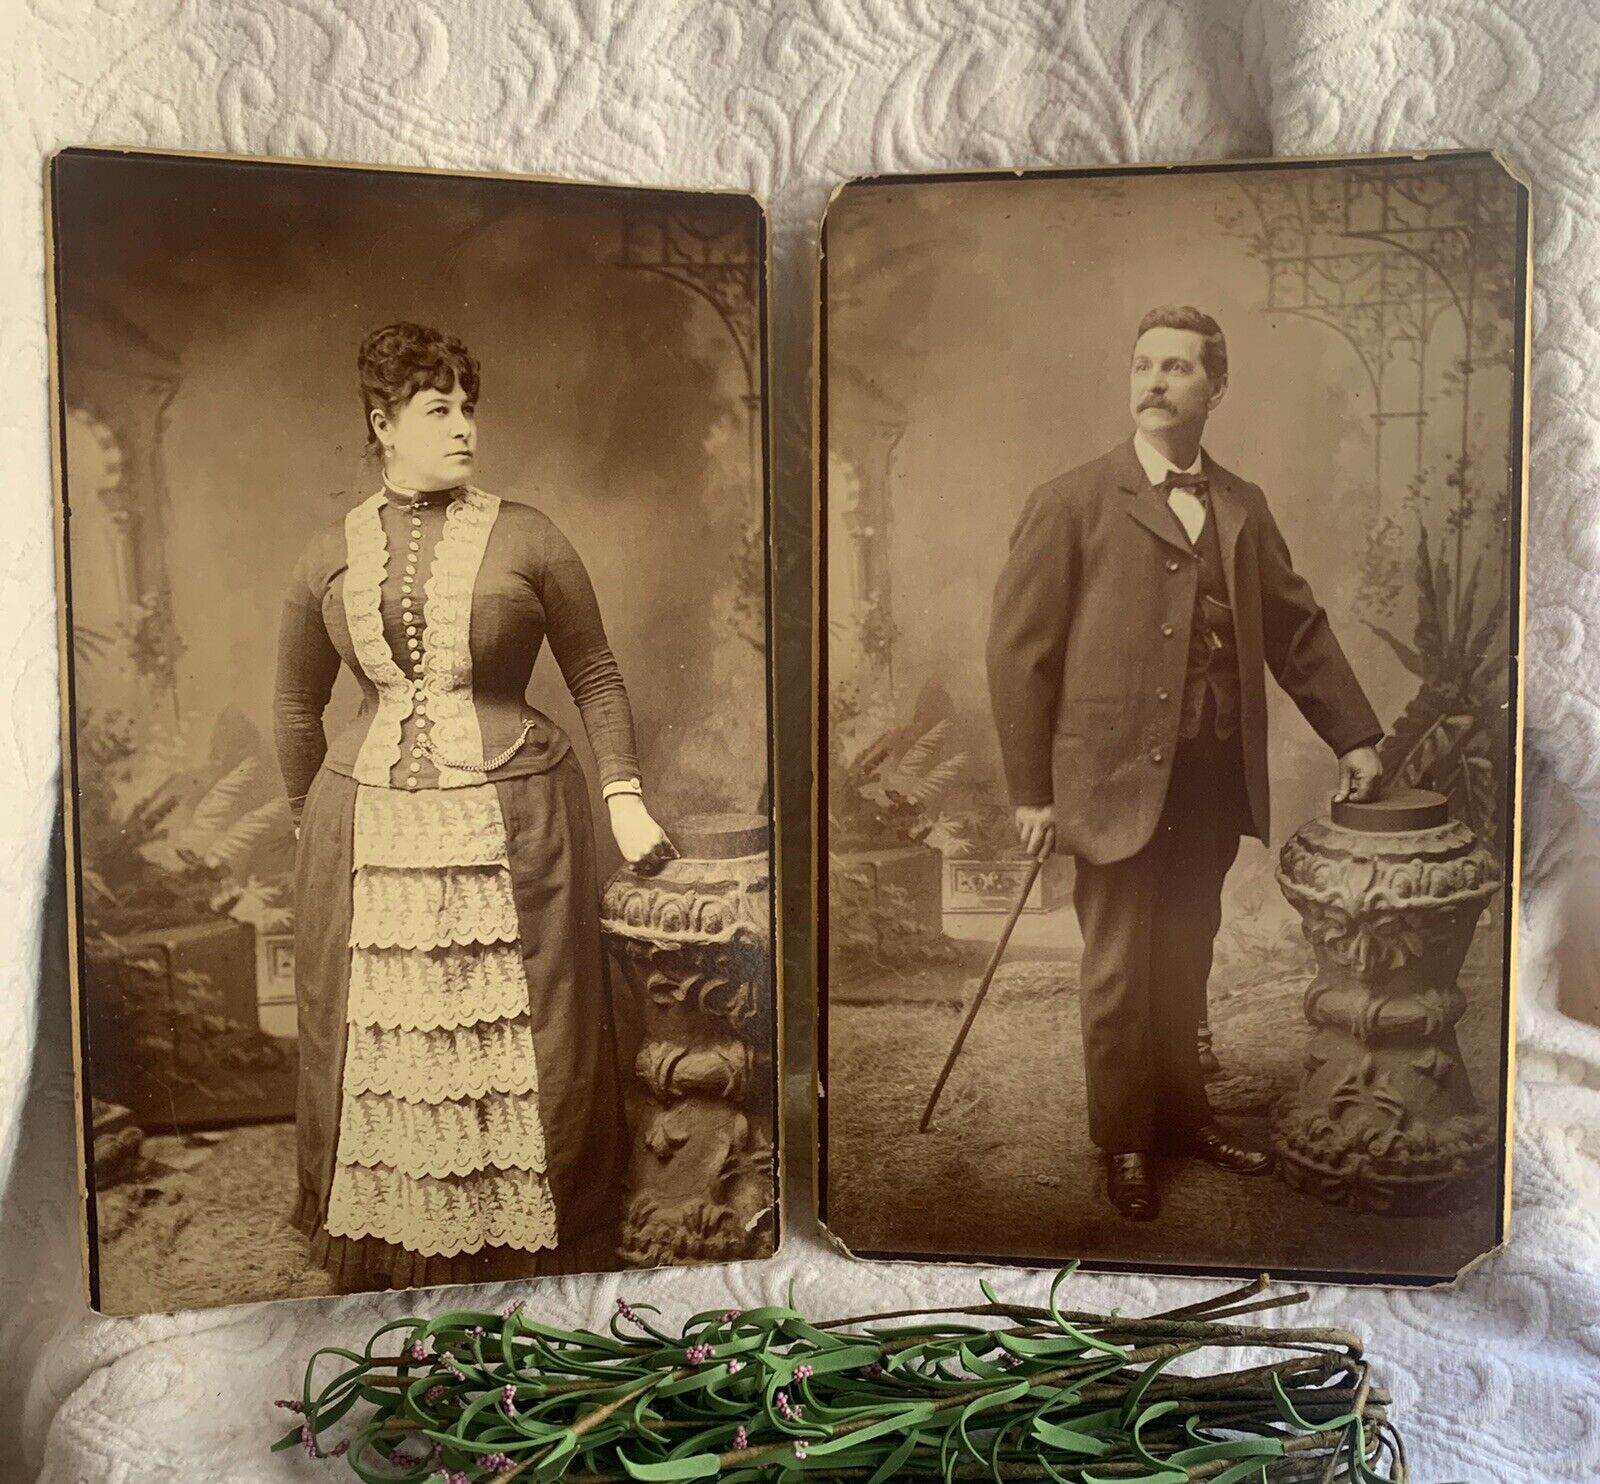 *RARE* LARGE ANTIQUE CABINET CARDS PHOTO 1800’s HUSBAND & WIFE~7.5” X 12” COUPLE